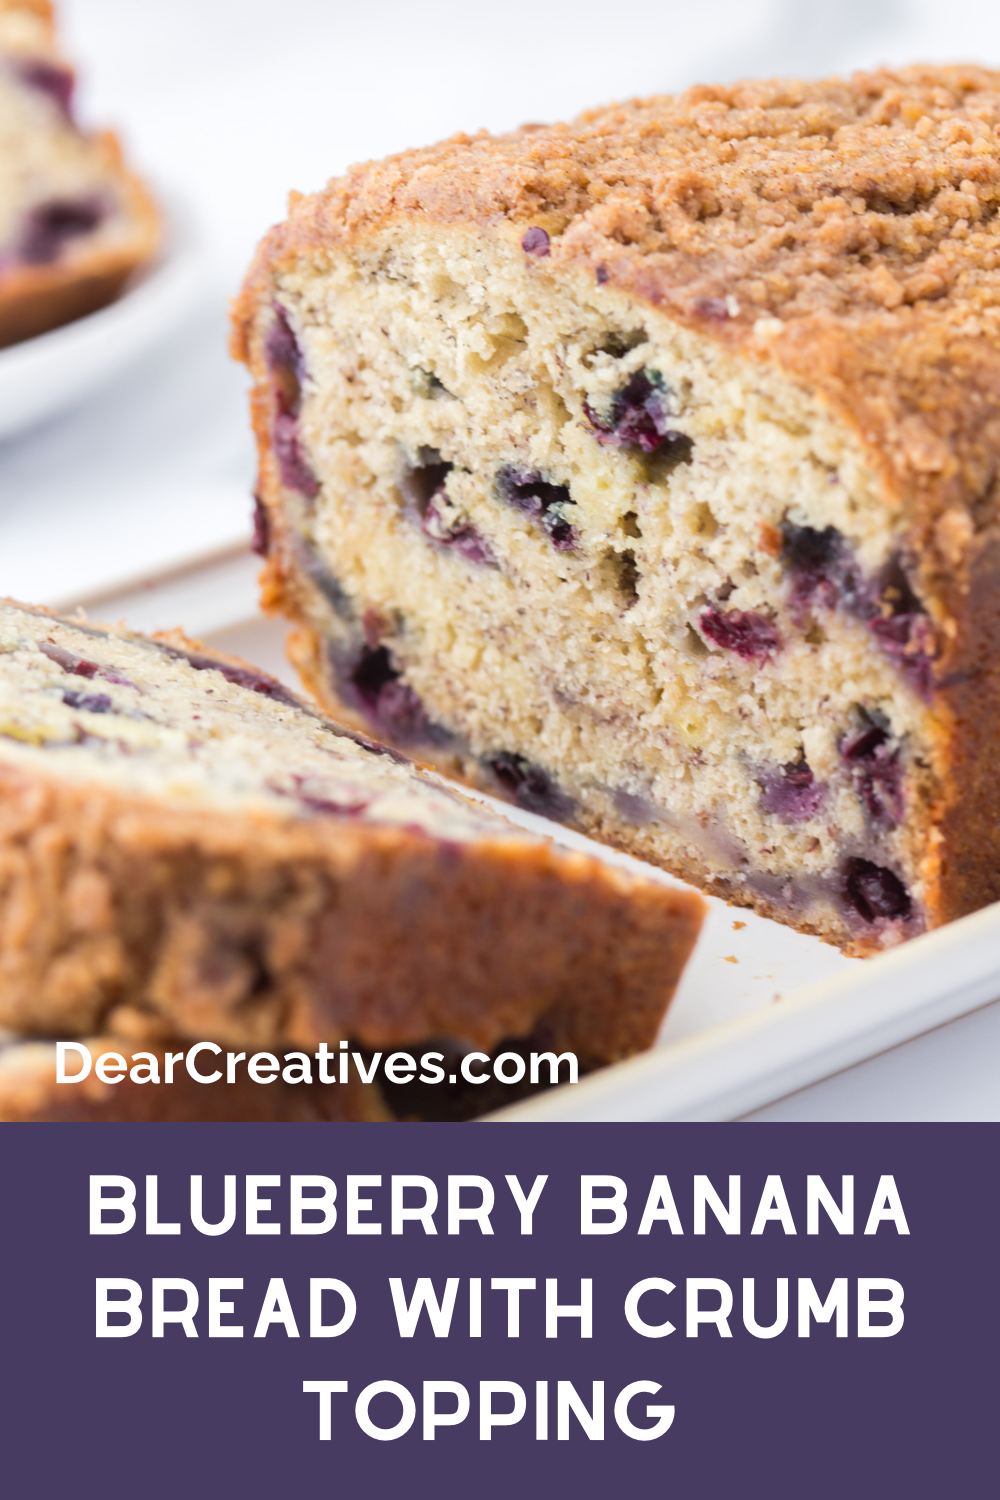 Banana Blueberry Bread recipe with crumb topping. This tasty, moist banana bread with blueberries is easy to make and bake. Get the recipe at DearCreatives.com find this and more delicious quick bread recipes. Close up Image of slices of blueberry banana bread filled with blueberries plus crumb topping.